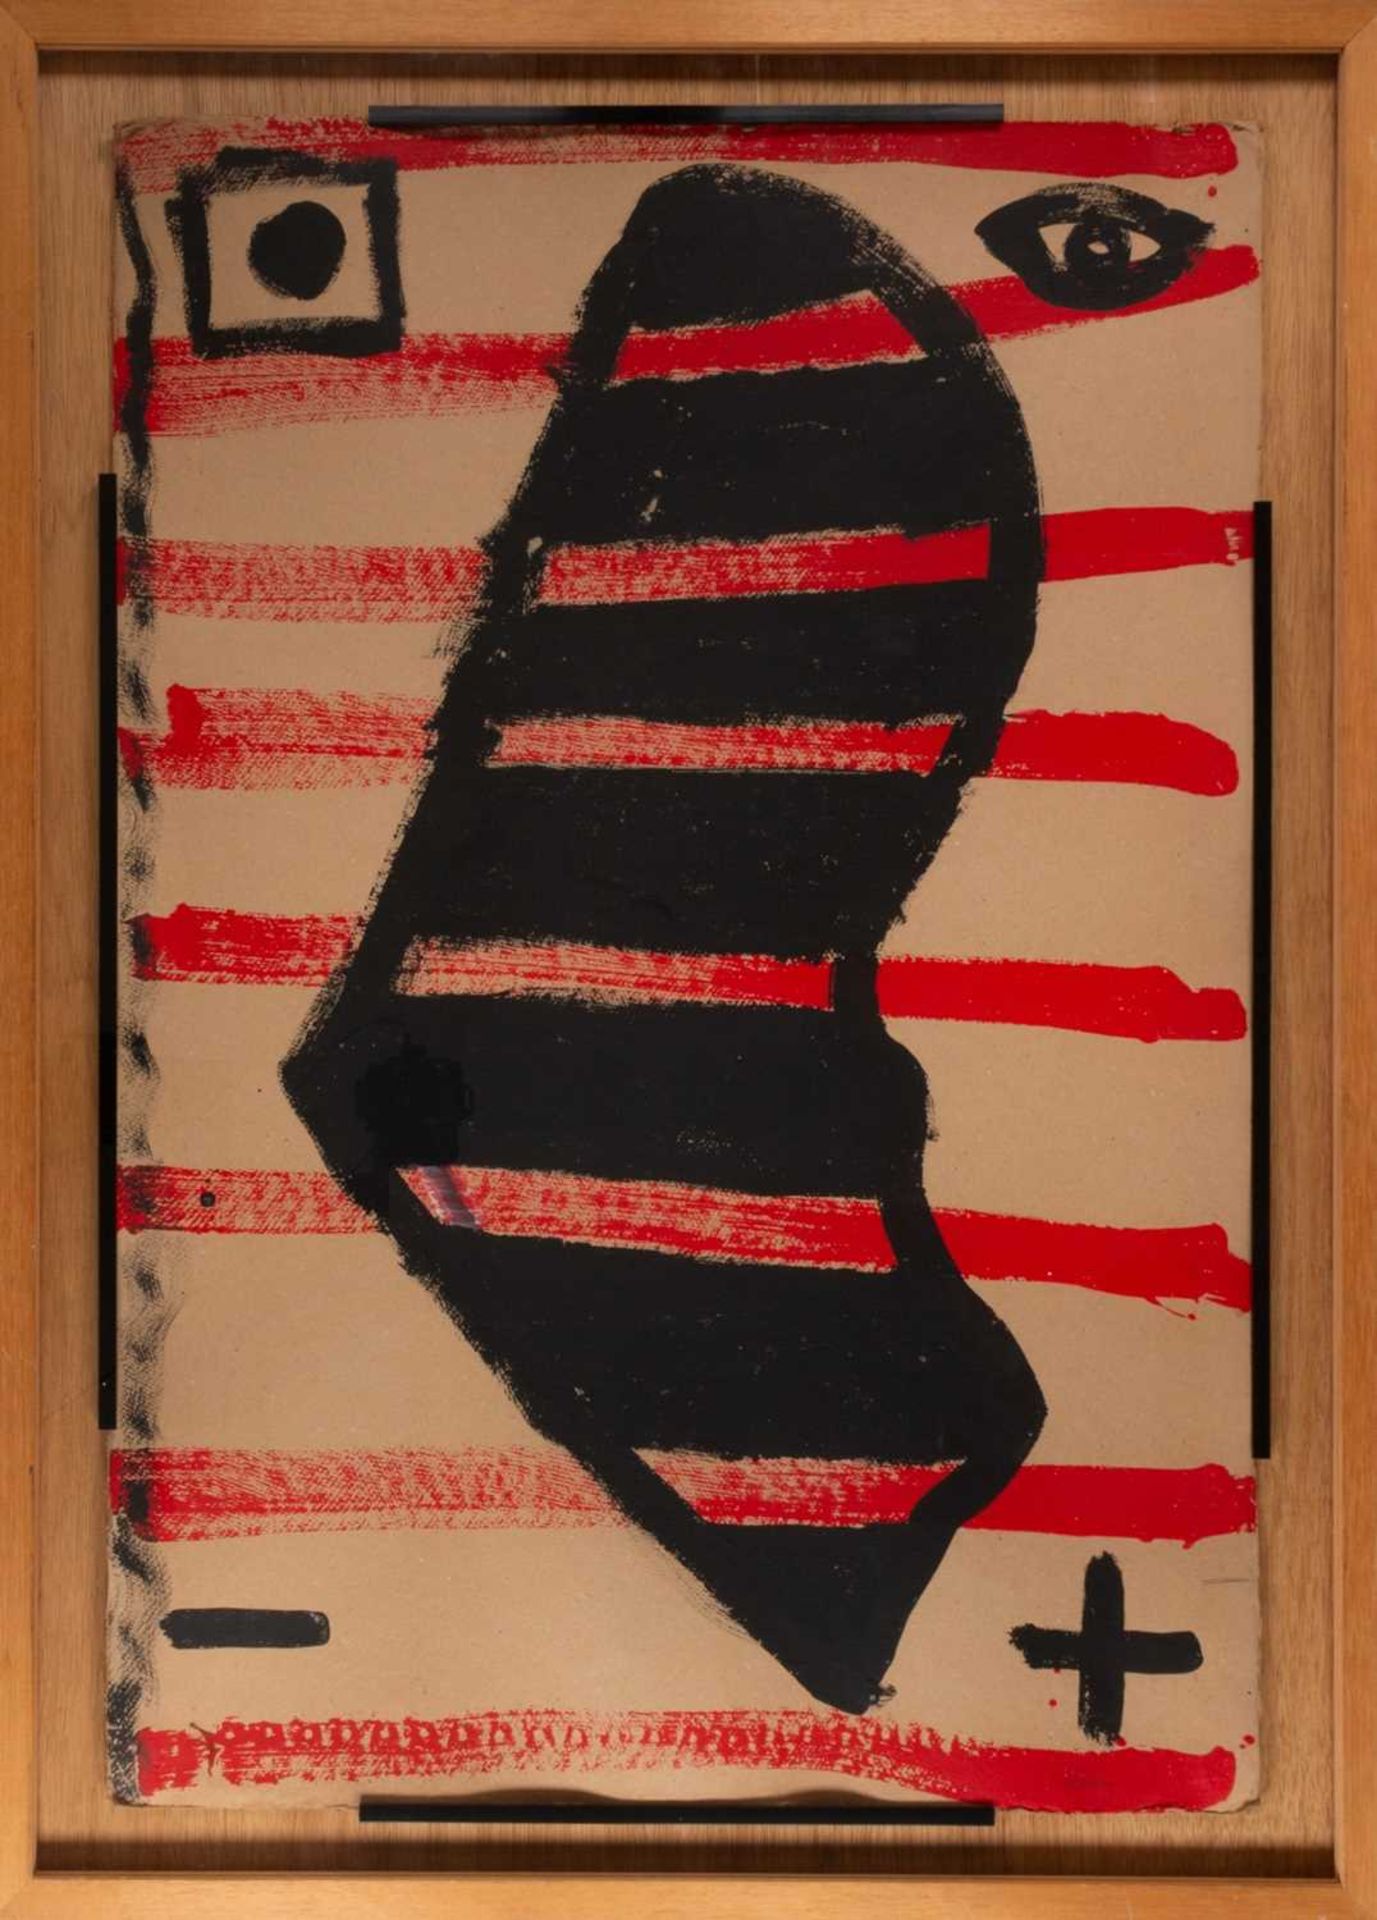 A. R. Penck und Wolfgang Opitz - Image 2 of 2